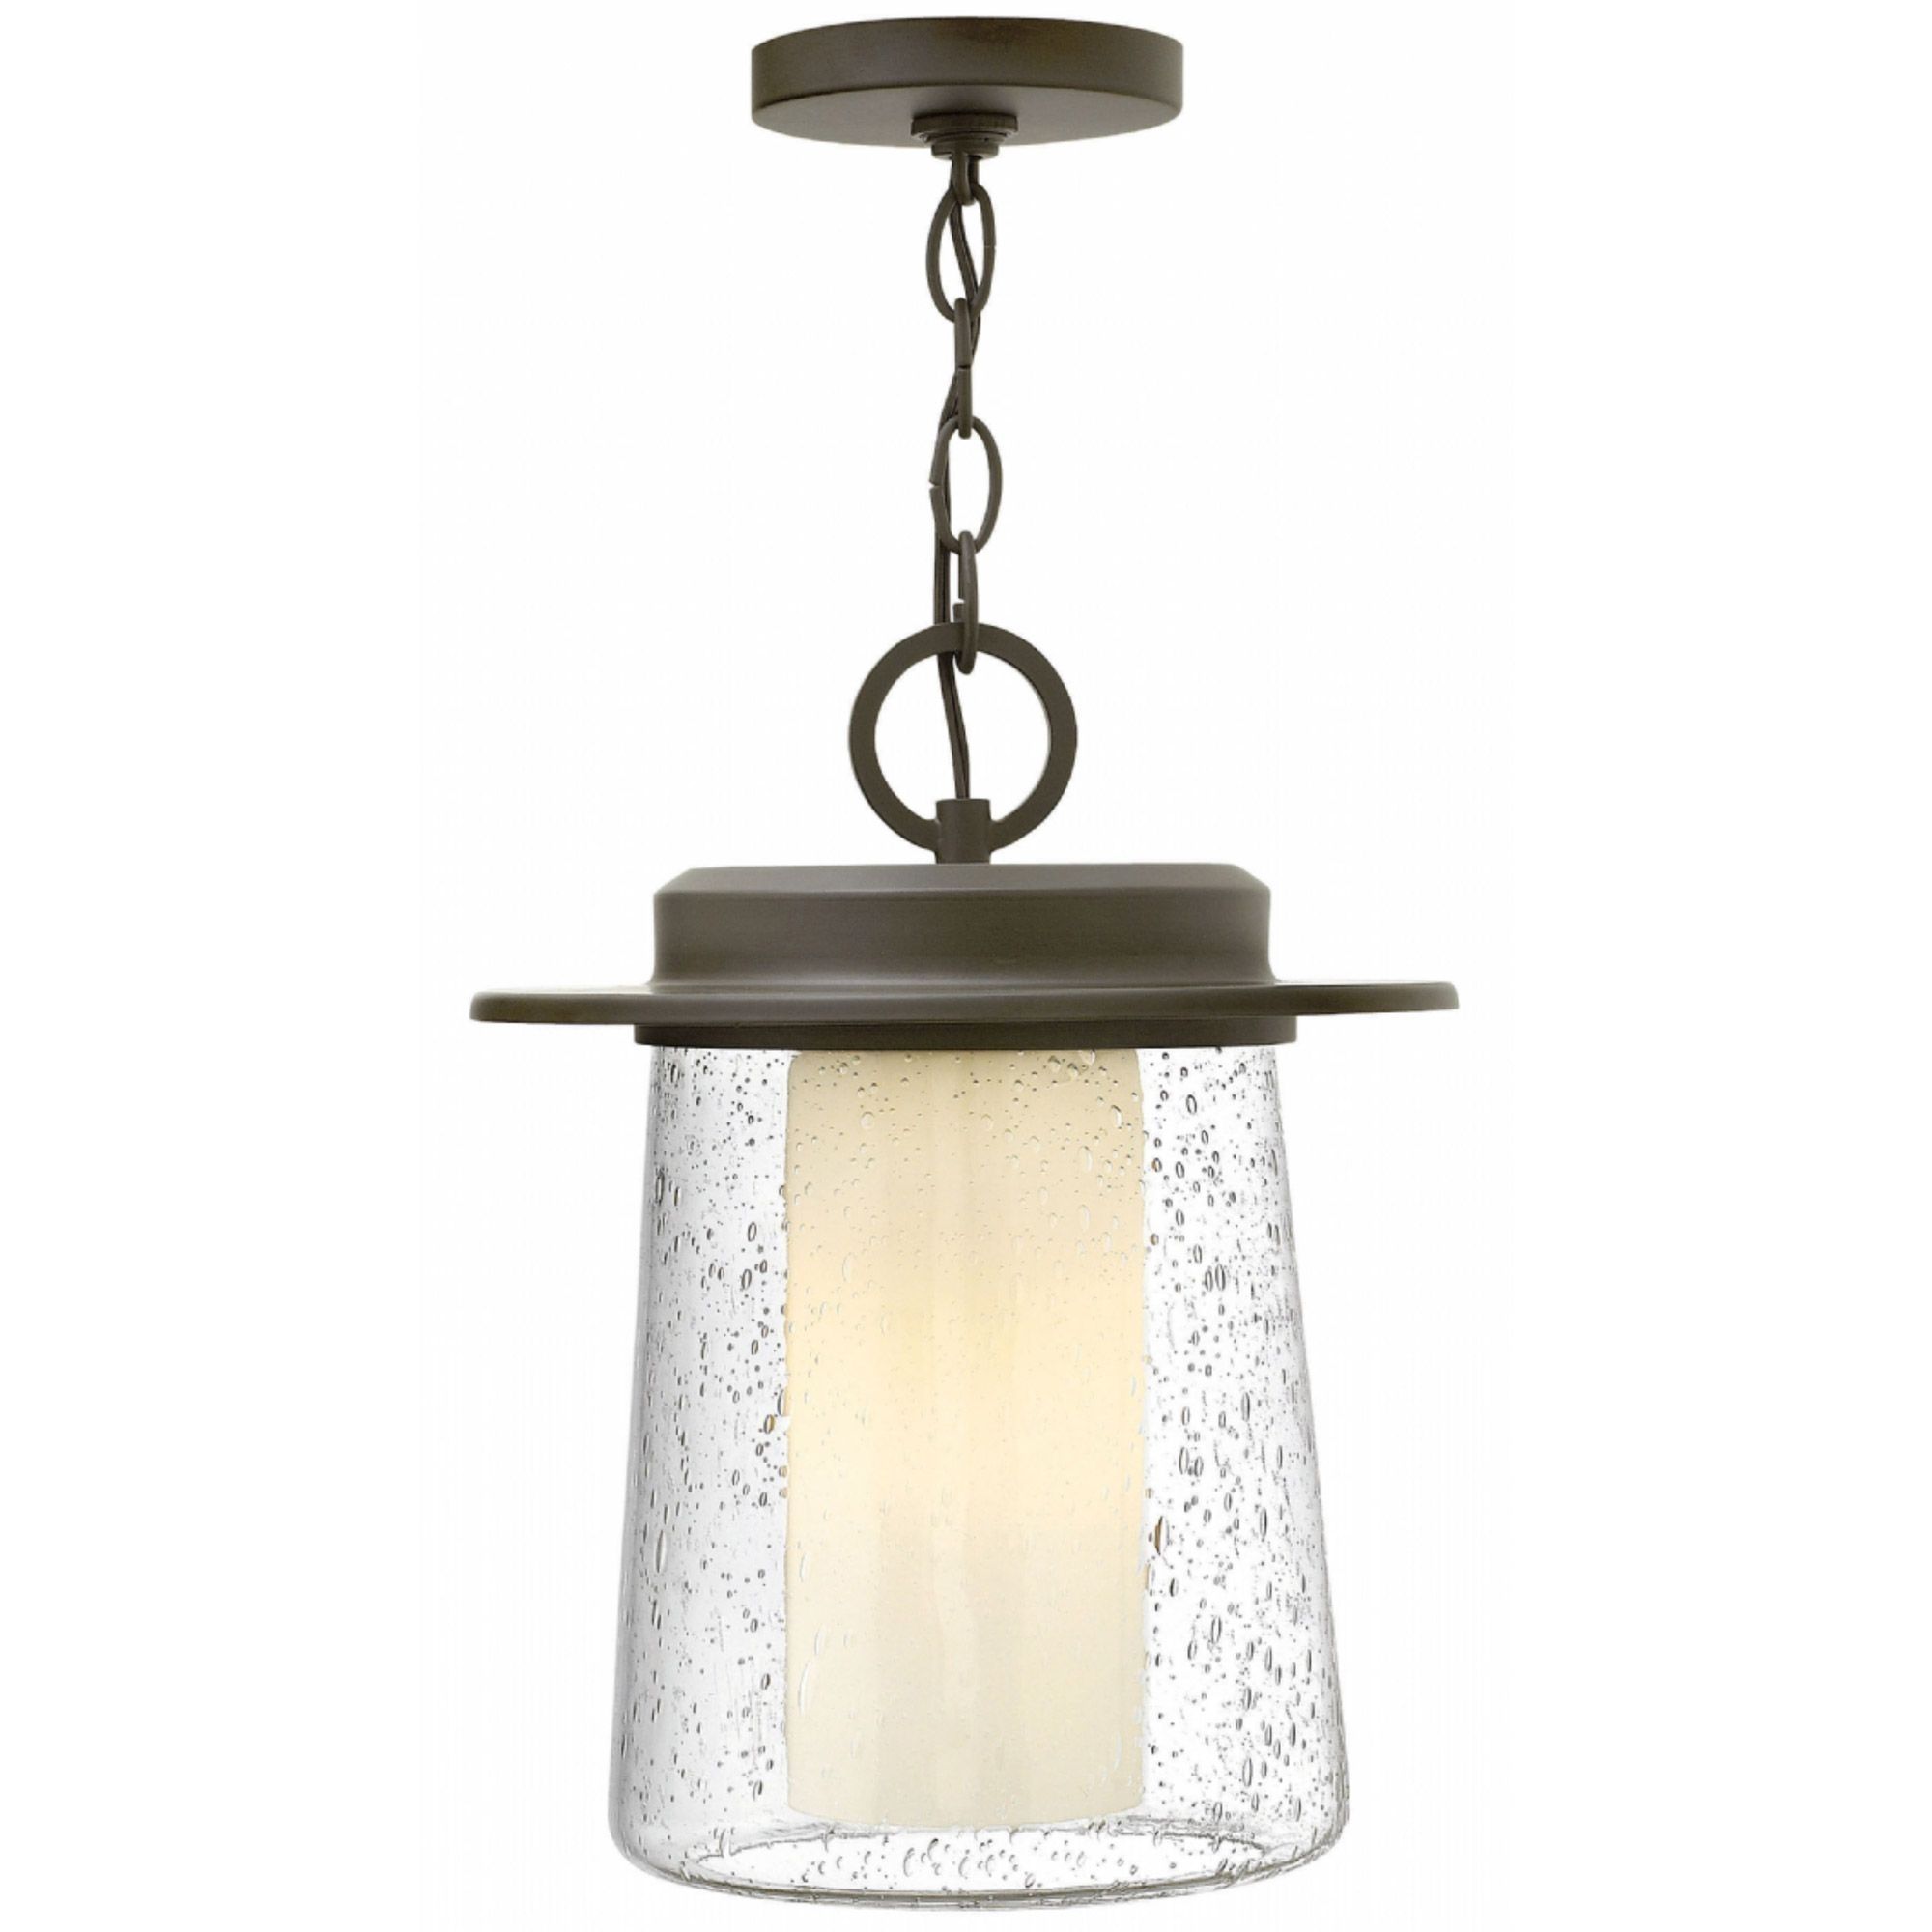 Riley Outdoor Pendant | Hinkley Lighting At Lightology | Outdoor Regarding Hinkley Outdoor Ceiling Lights (View 4 of 15)